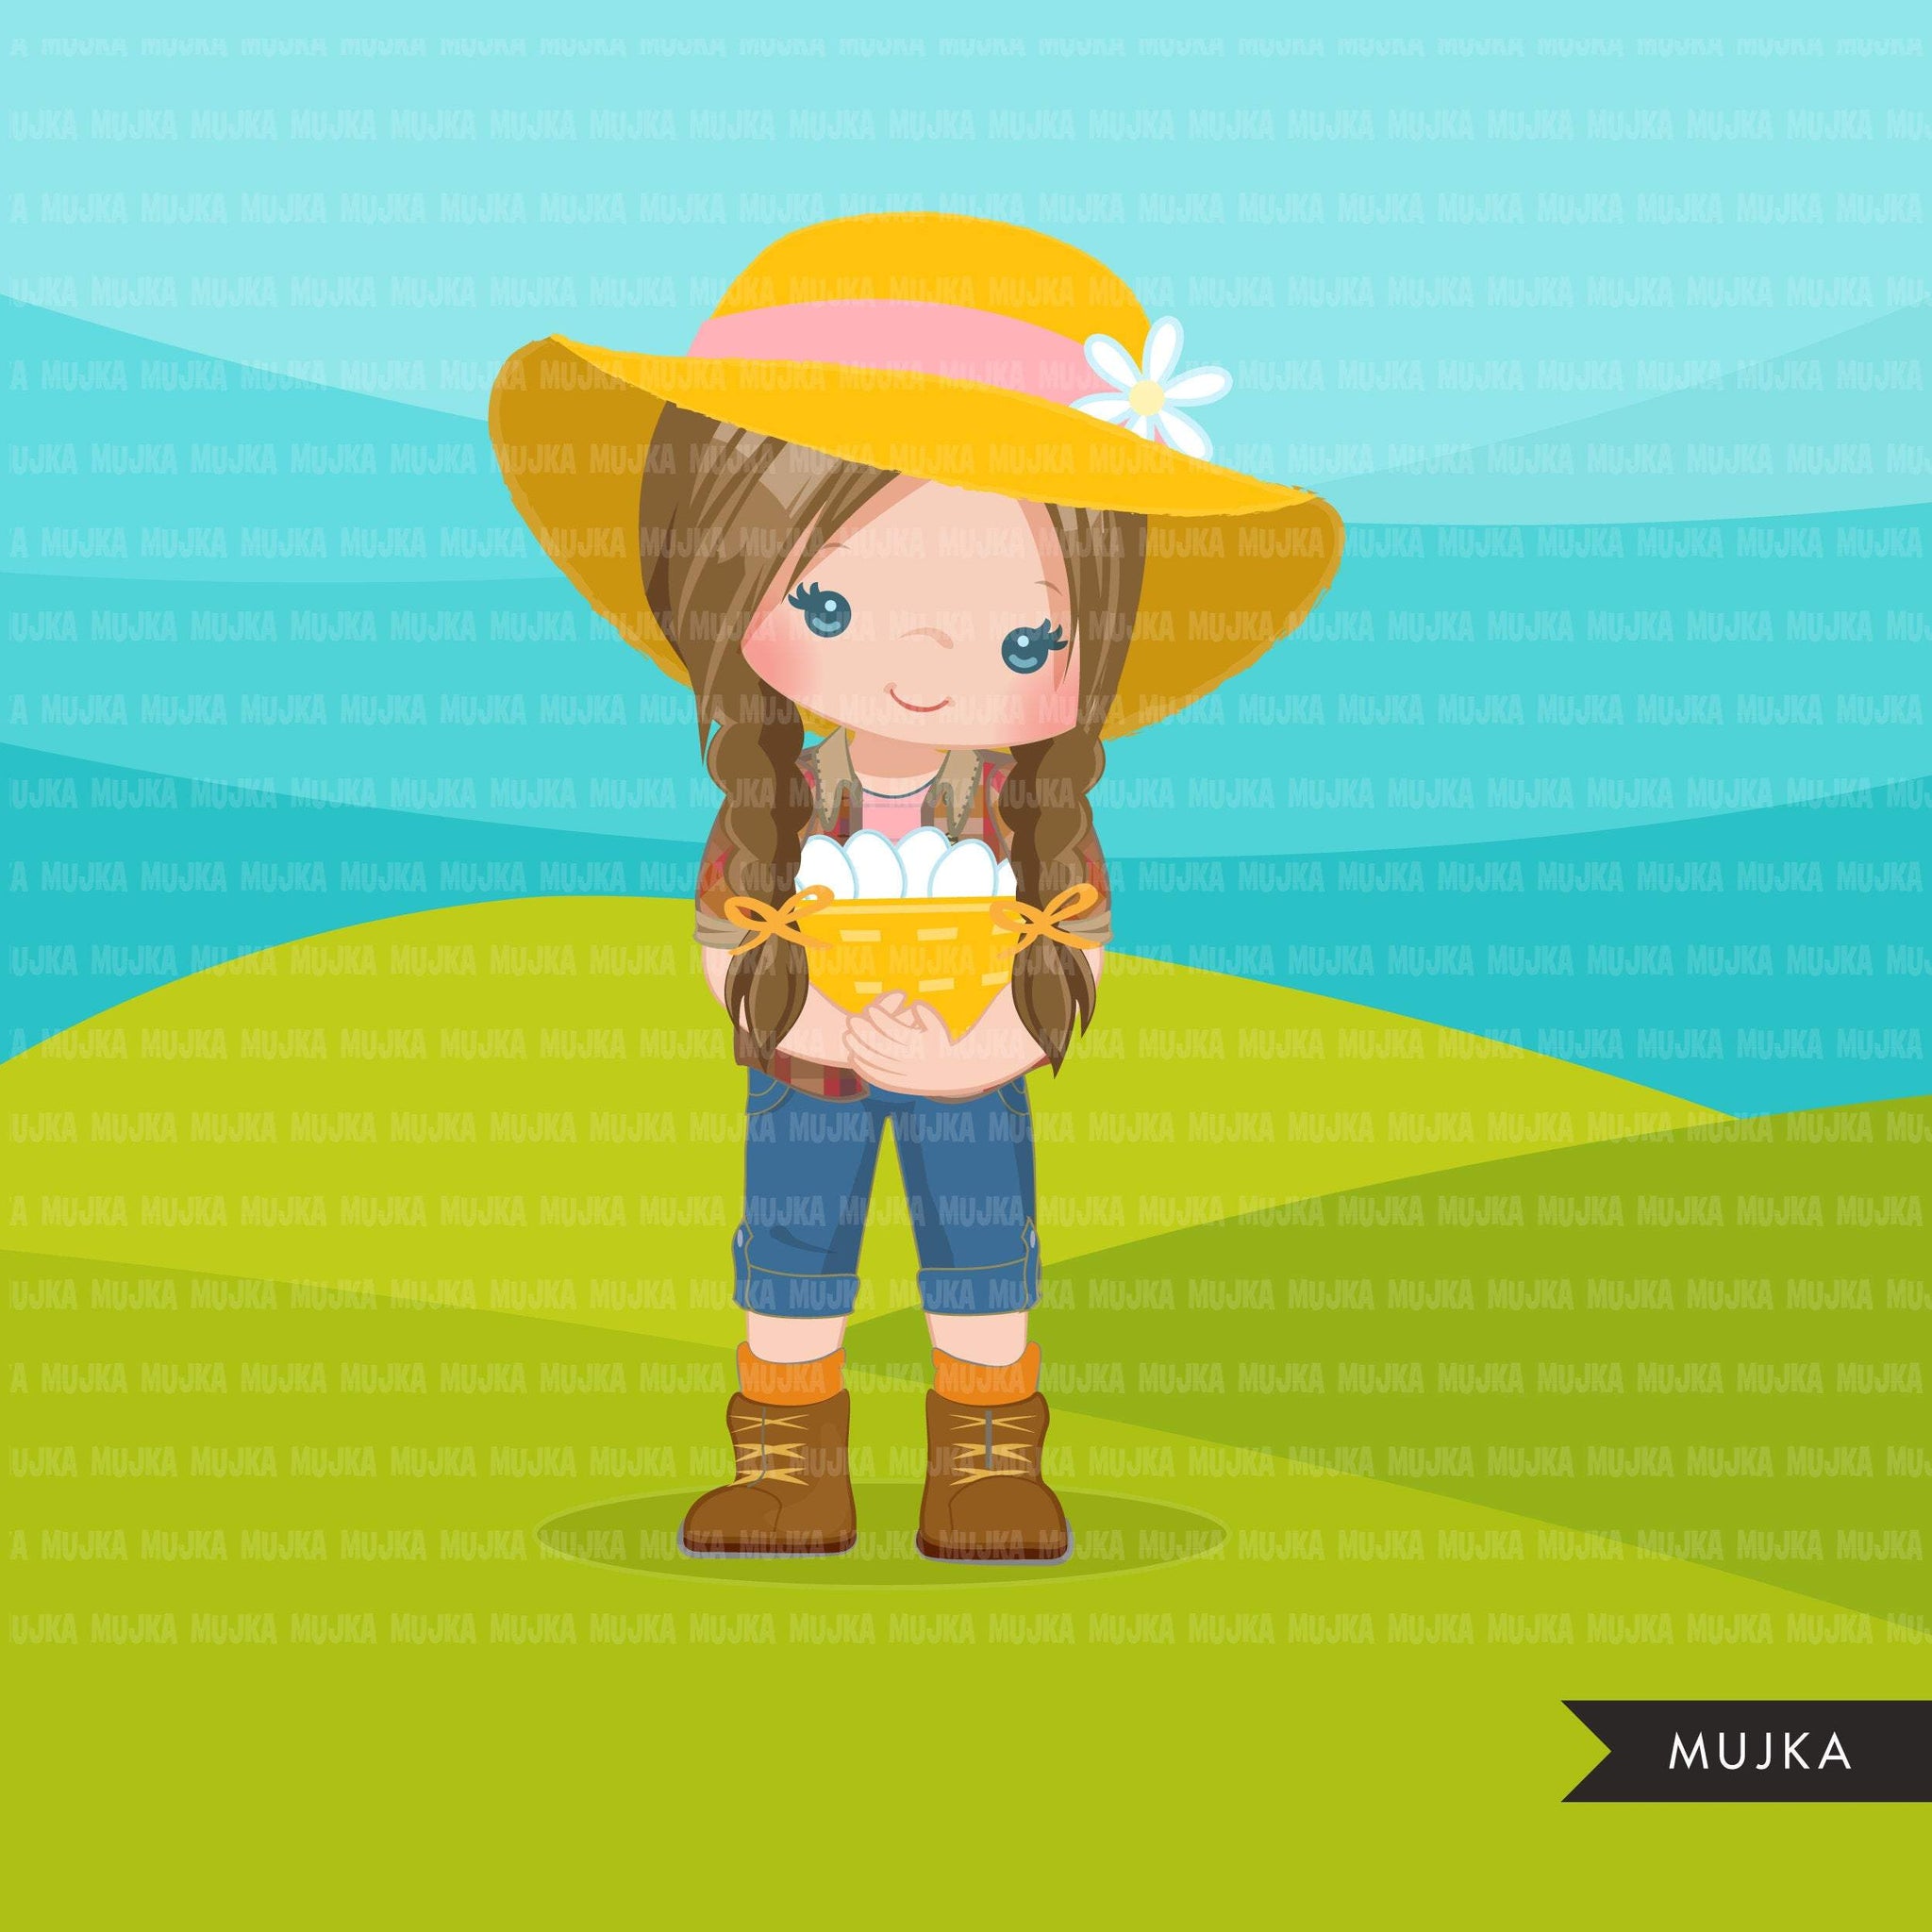 Farmer Girls clipart, farmer characters with basket of eggs, farmer hat, country graphics, country girl with hat